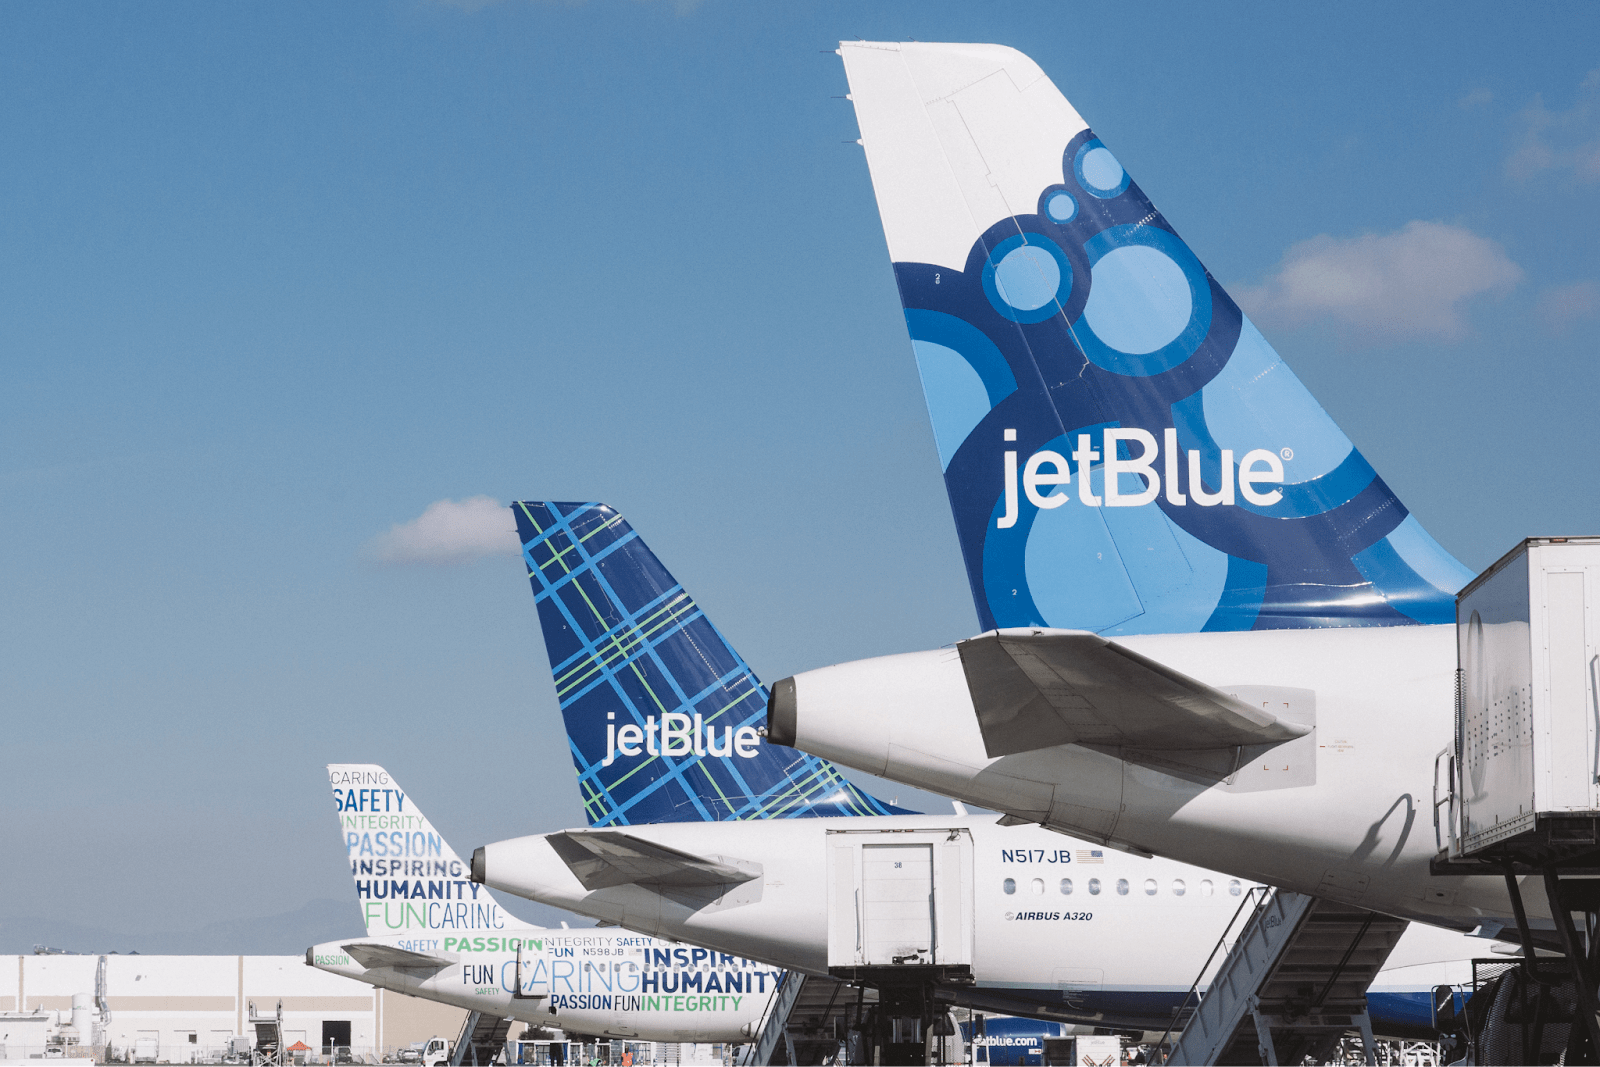 How to Transfer American Express Points to TrueBlue Miles